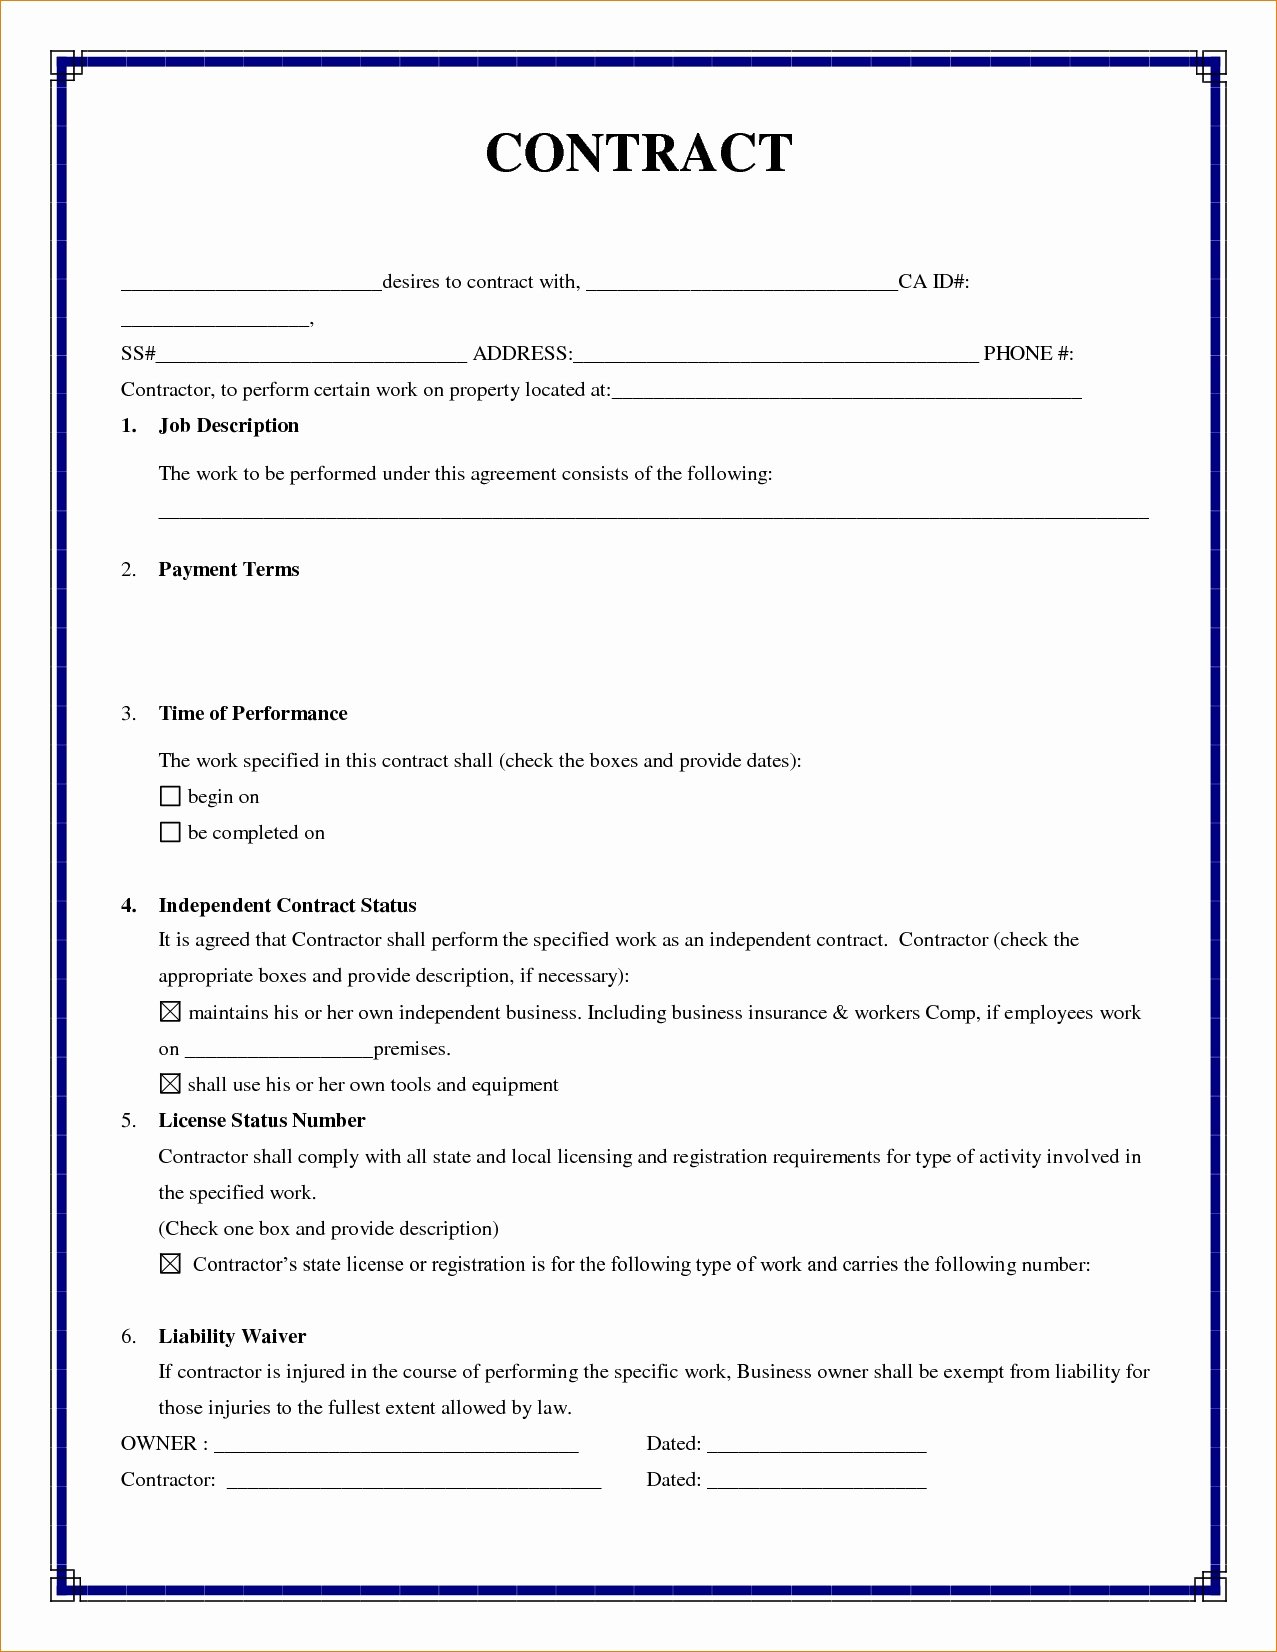 Free Roofing Contract Template Lovely Simple Contract Agreement